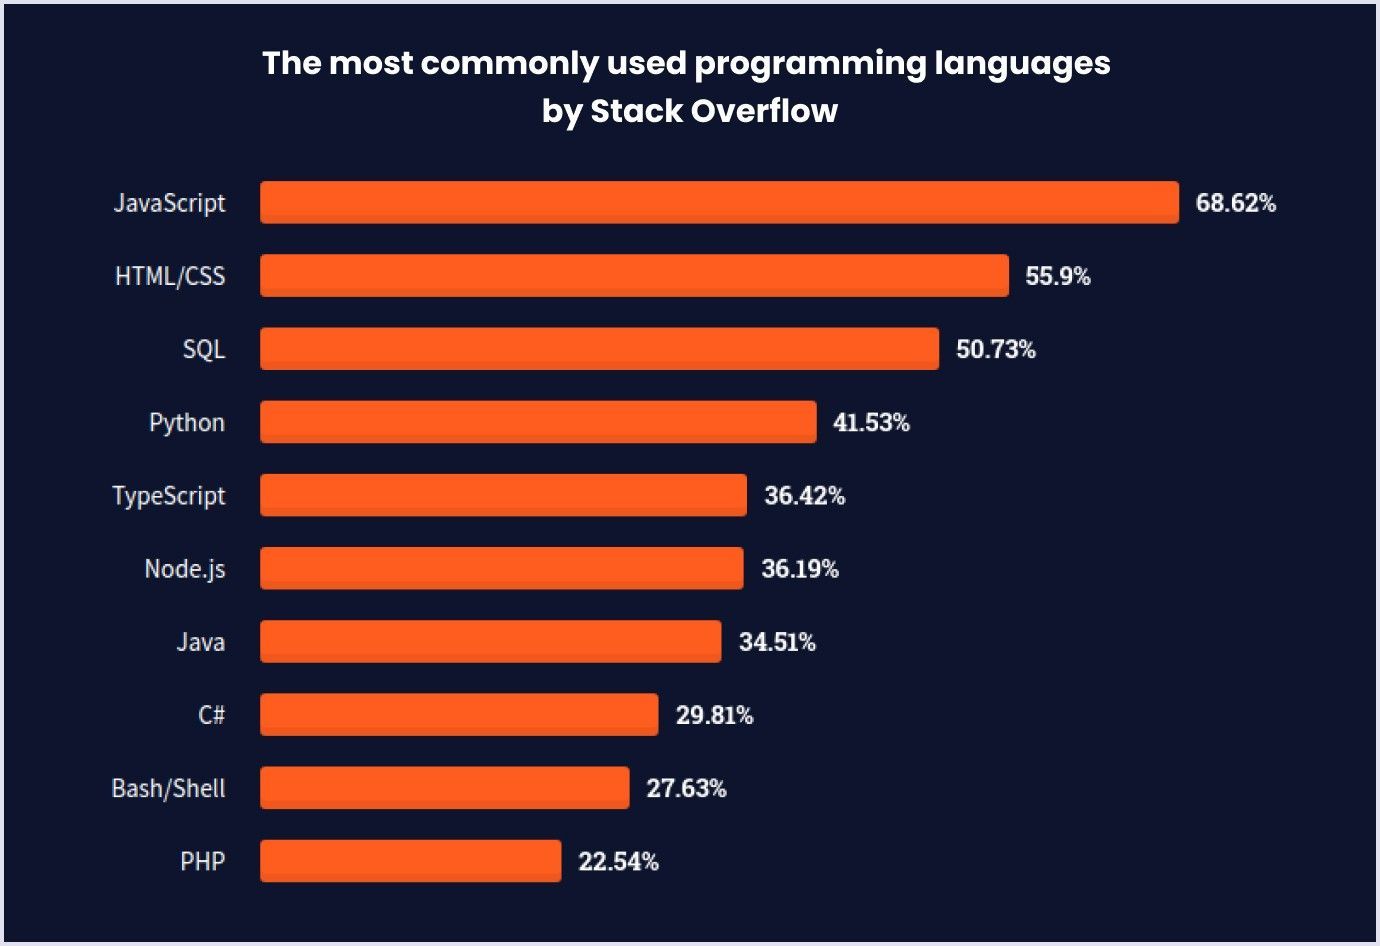 JavaScript as the most commonly used programming language by Stack Overflow